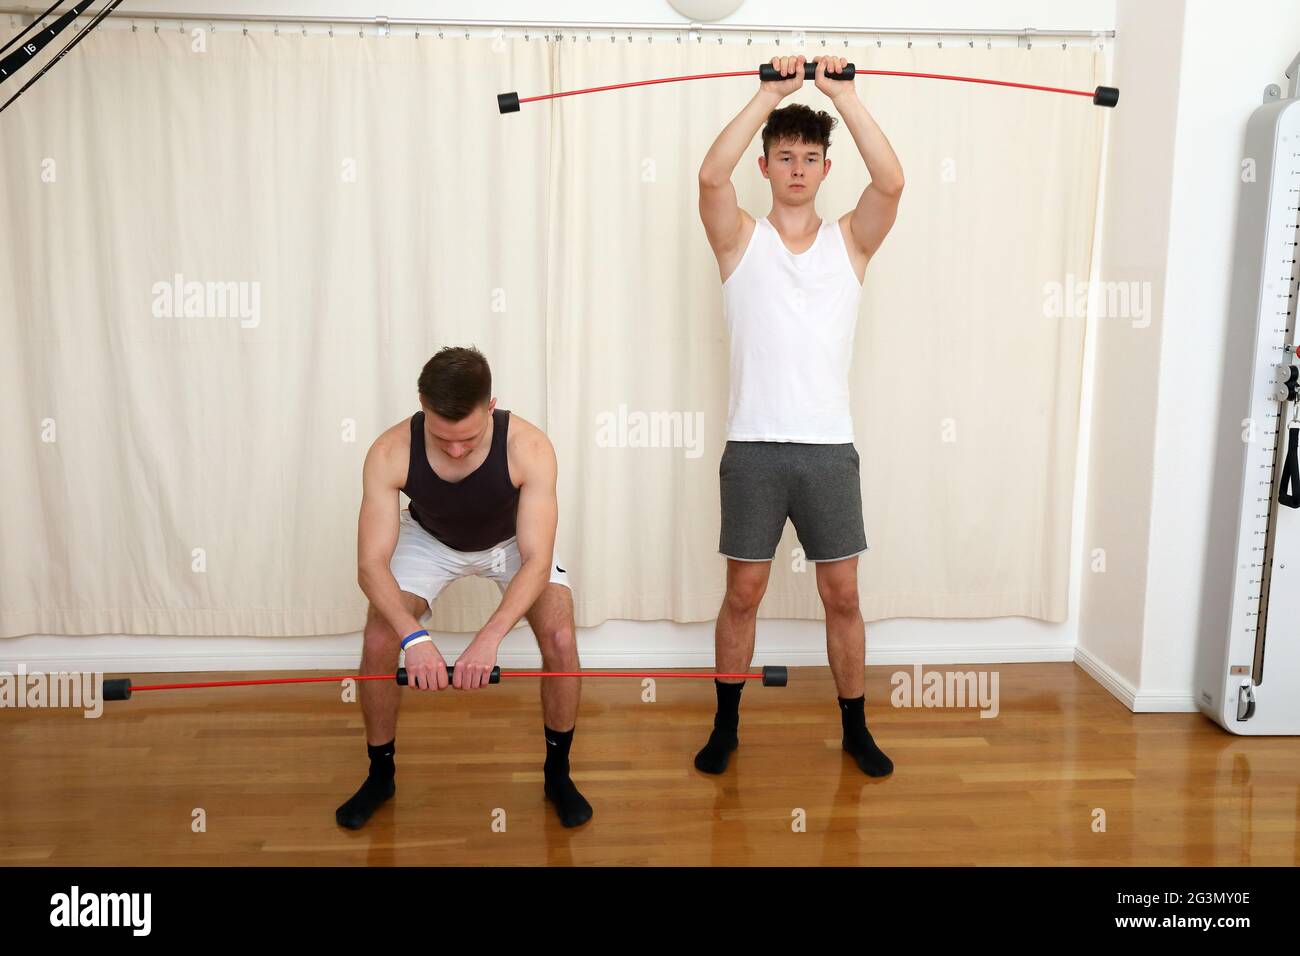 "22.11.2020, Berlin, , Germany - Patients in a physiotherapy practice exercising with swinging bars. 00S201122D376CAROEX.JPG [MODEL RELEASE: YES, PROP Stock Photo